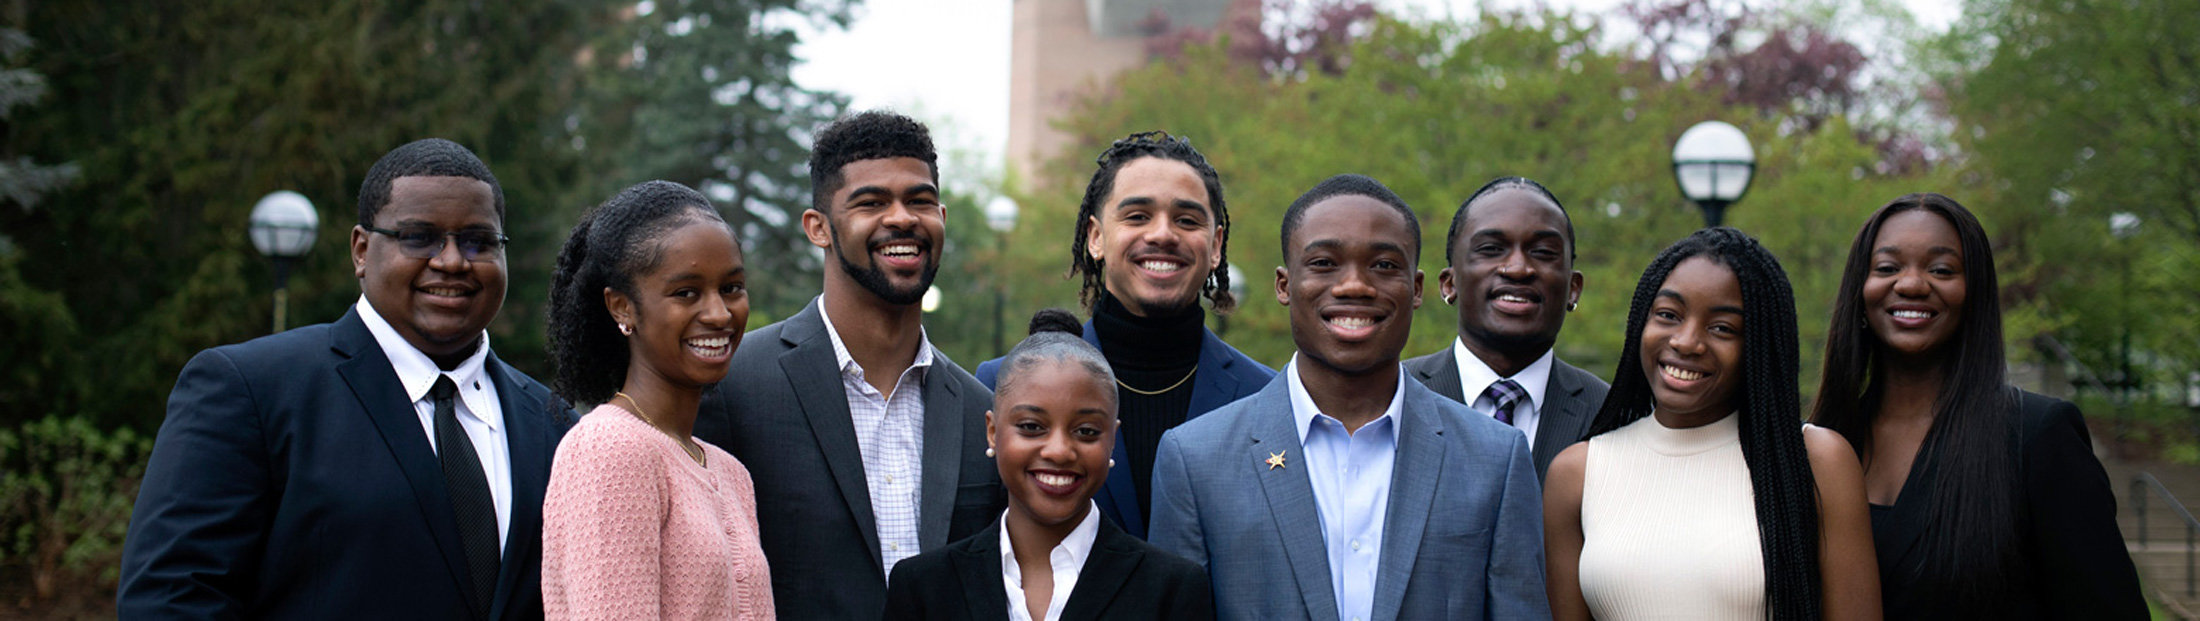 Members of the NSBE Chapter Executive Board pose for photos in front of the reflection pool on North Campus. Photo: Marcin Szczepanski/Michigan Engineering